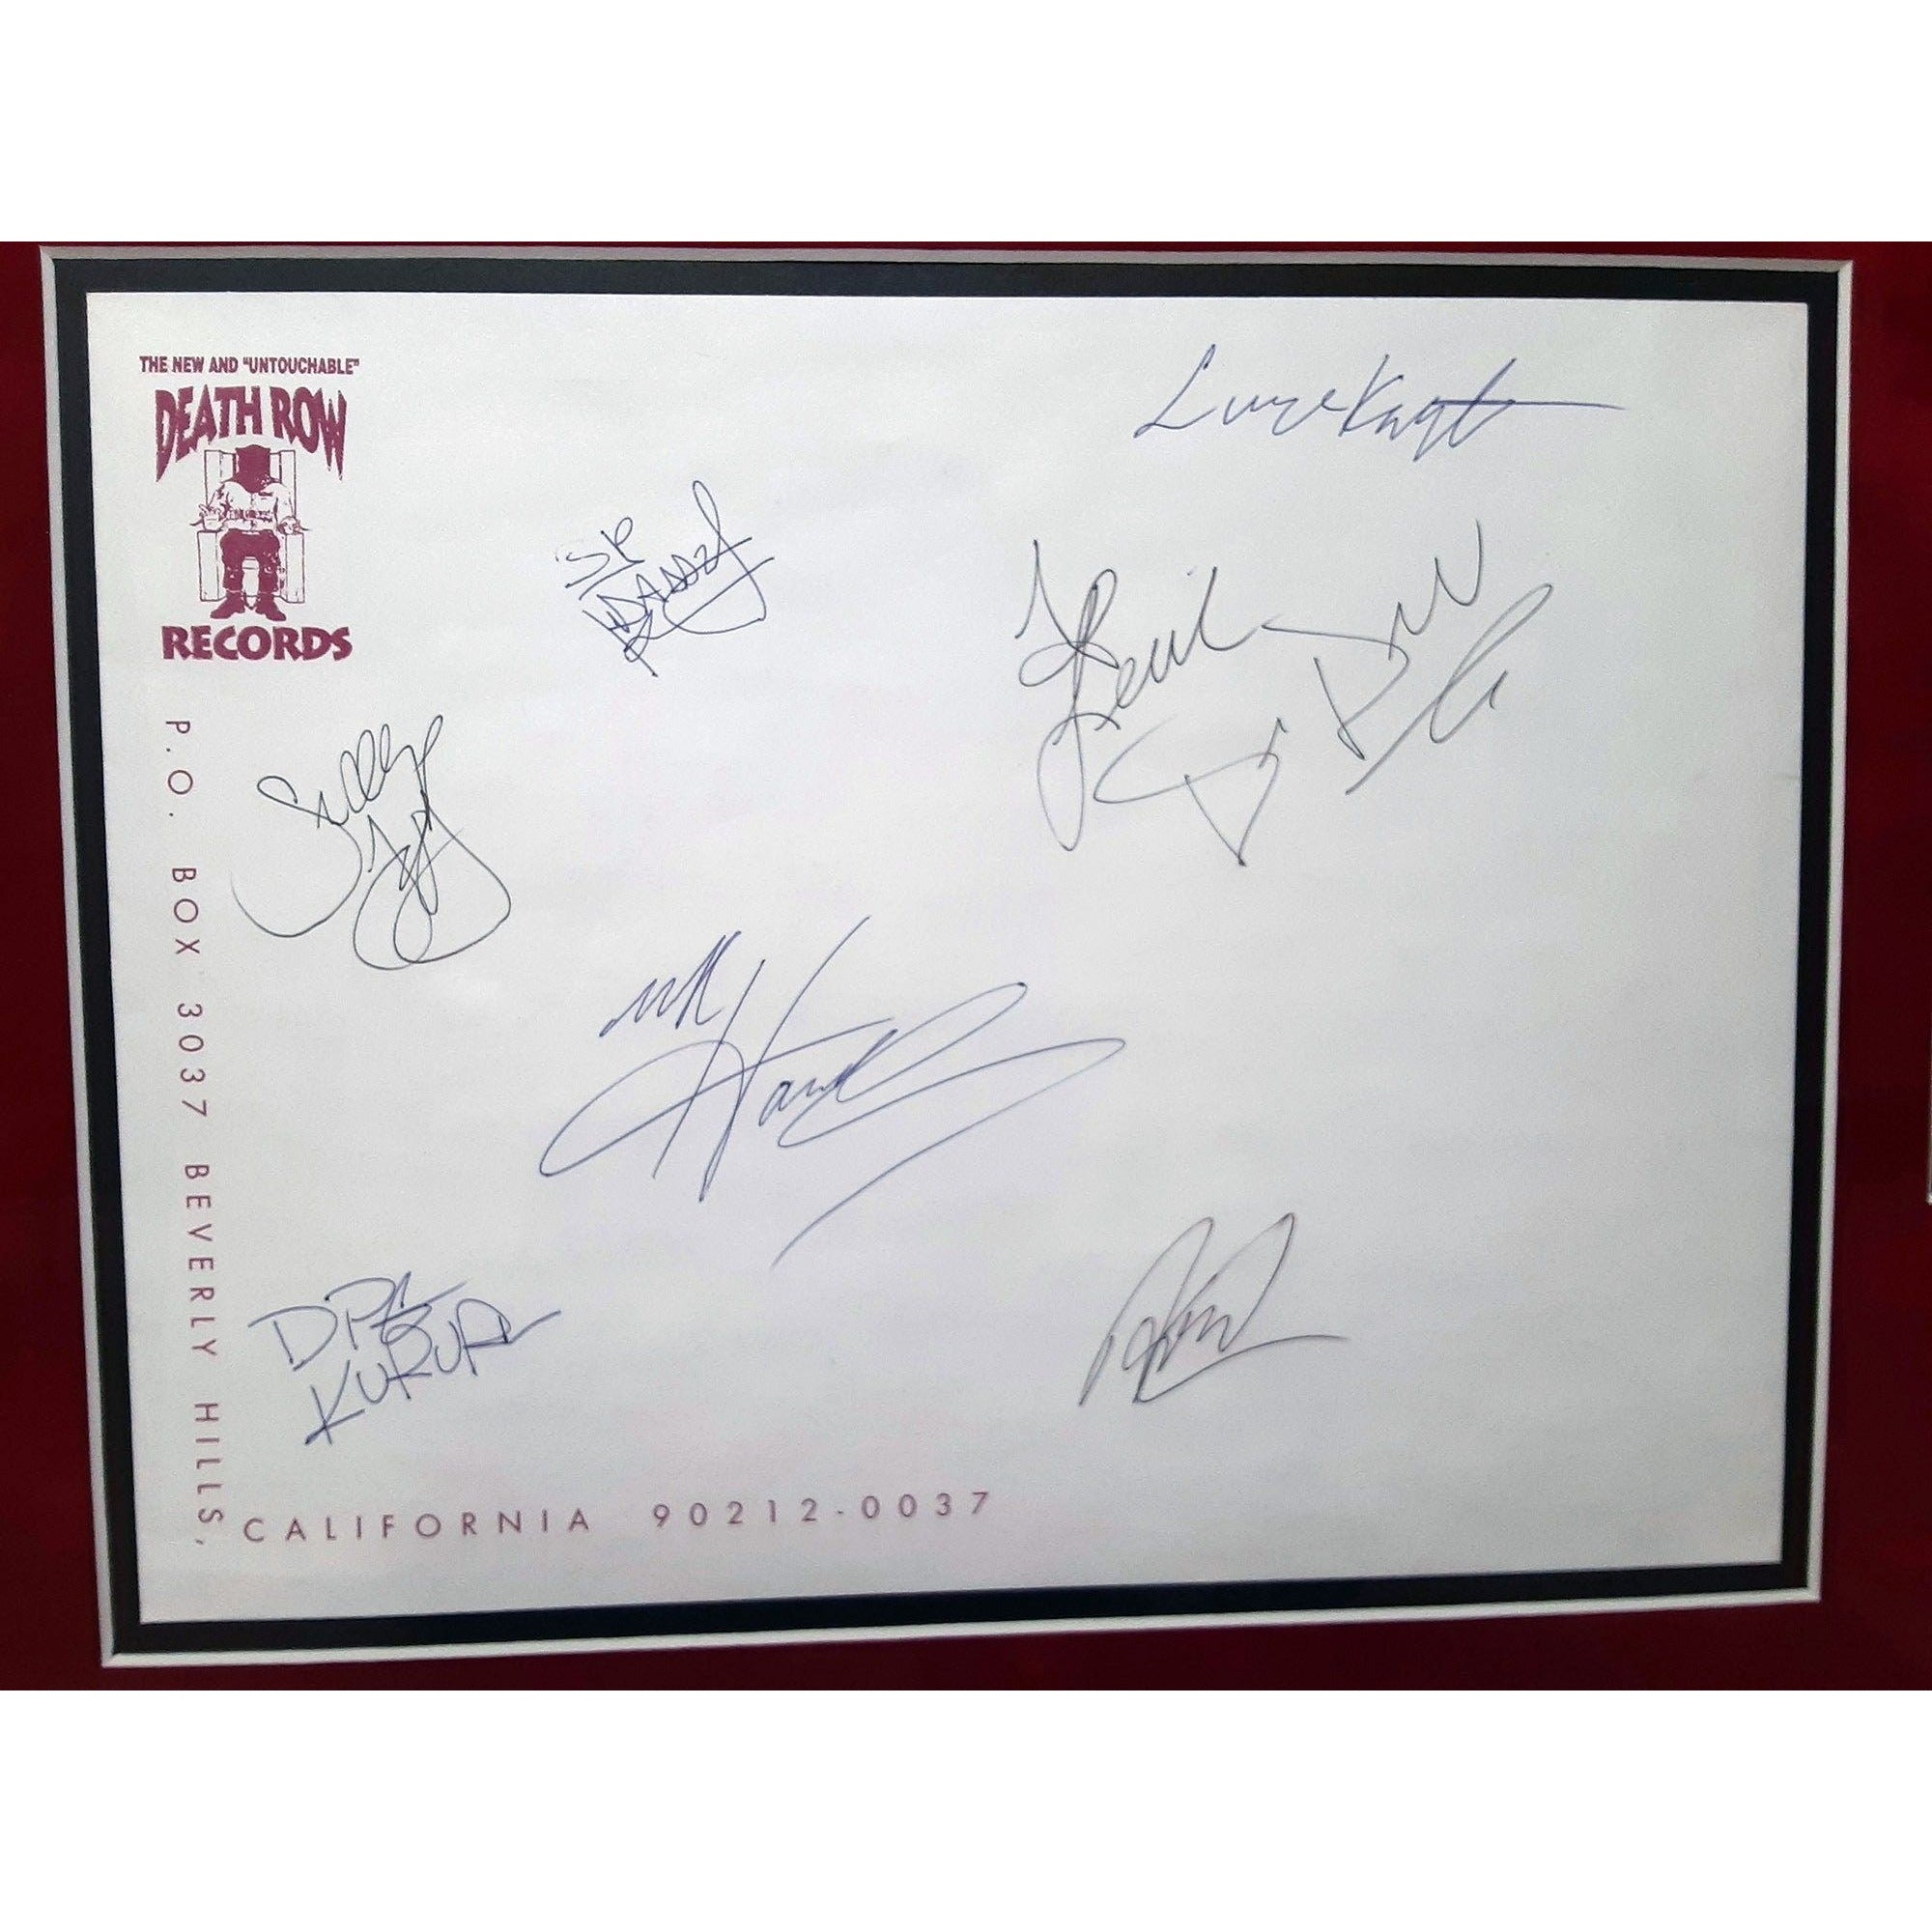 Suge Knight, Tupac Shakur, MC Hammer, Snoop Dogg, Dr, Dre, Death Row OG stationery signed and framed